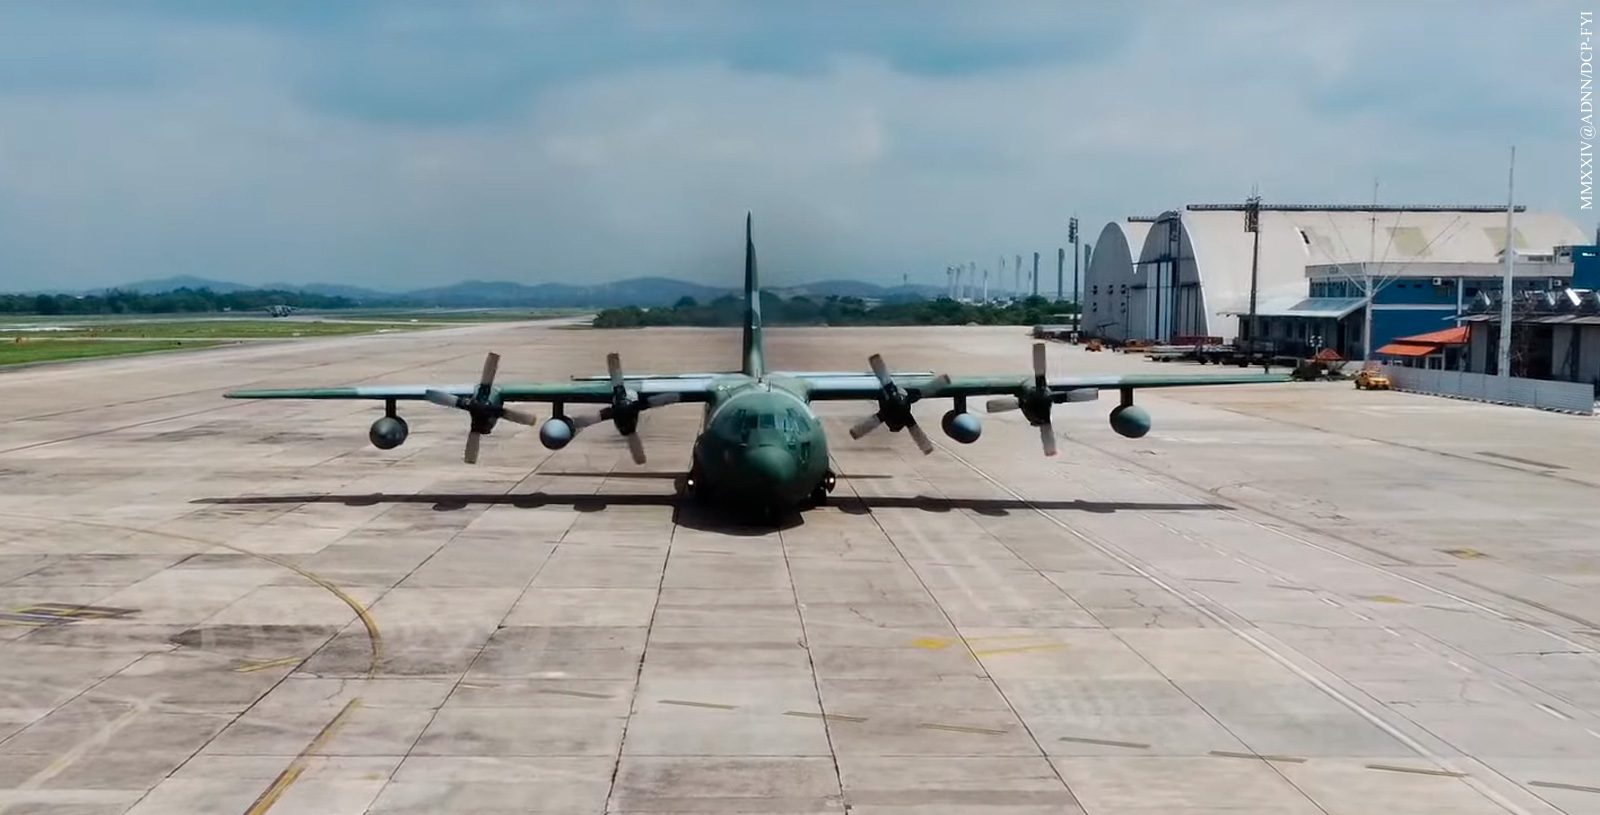 FAB bids farewell to C-130 aircraft with a series of tributes